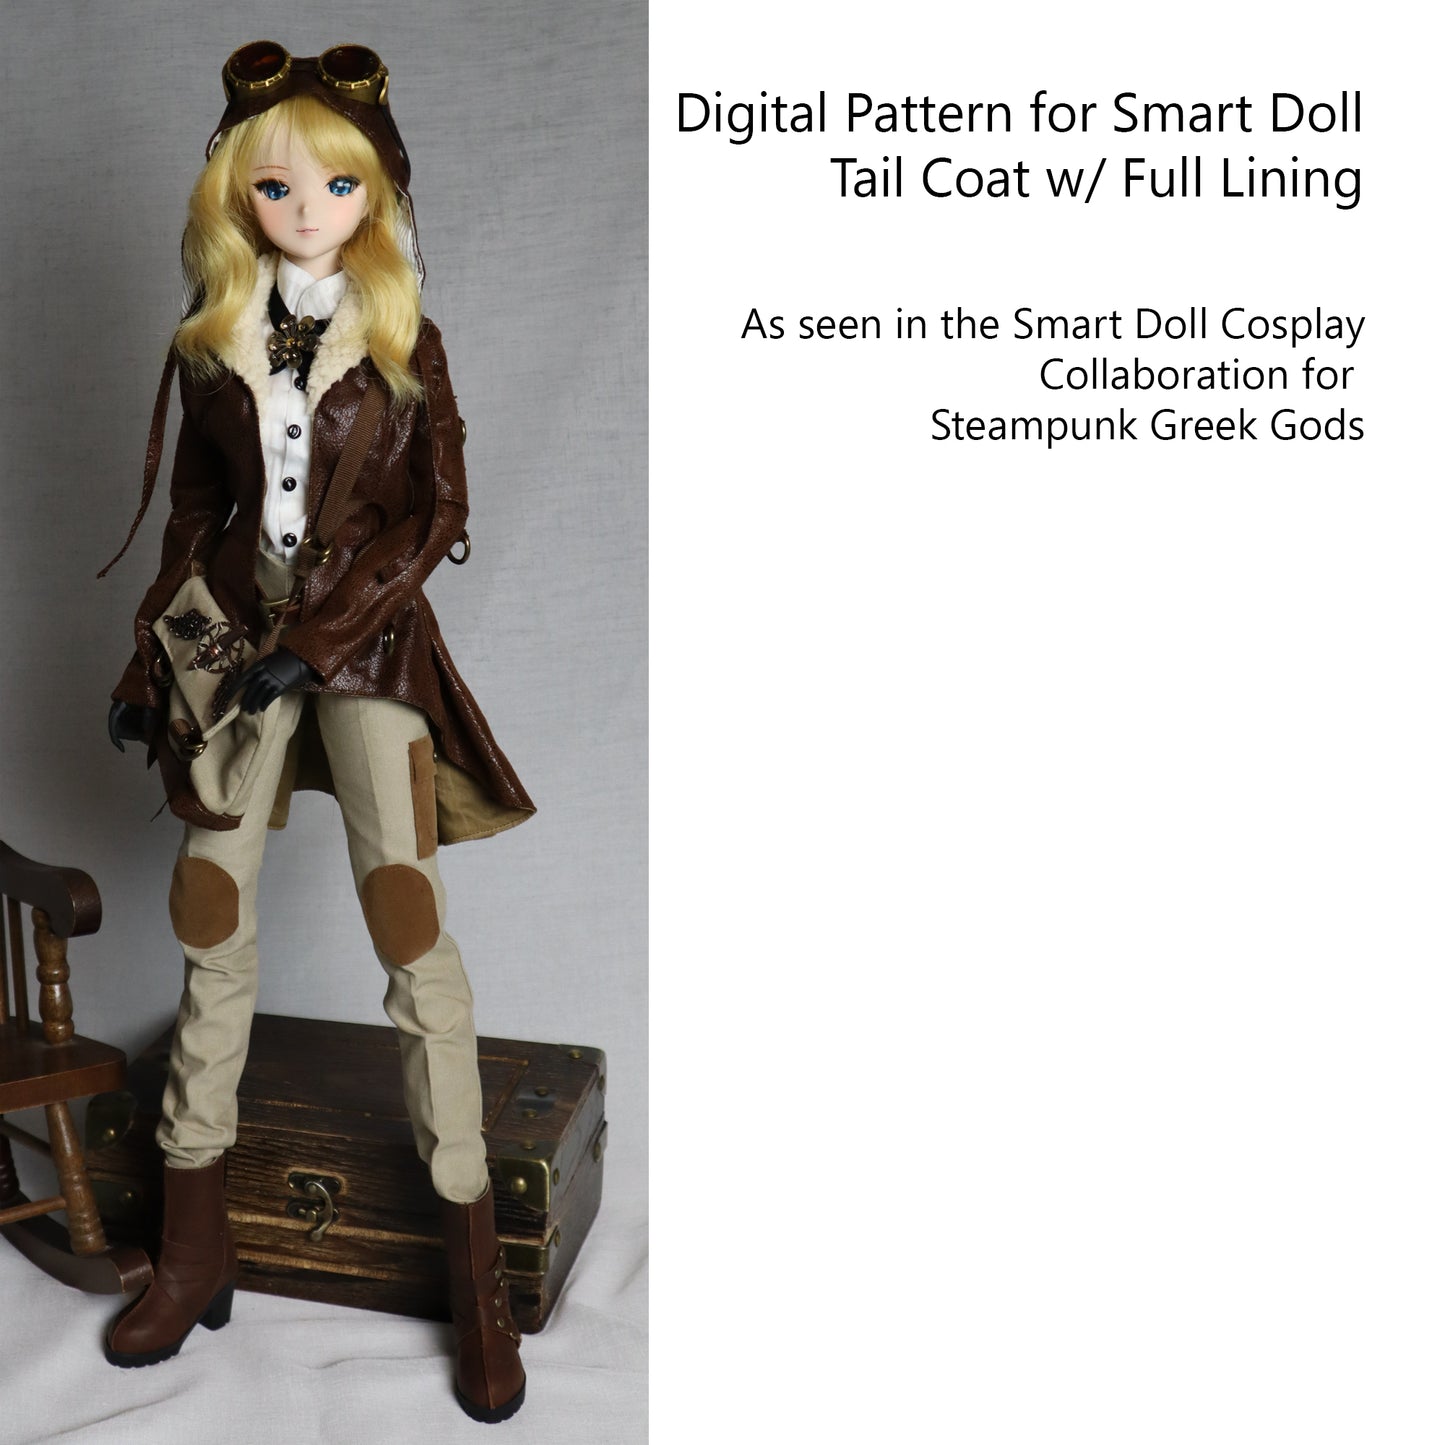 Steampunk Inspired Tail Coat for Smart Doll Digital Pattern Download